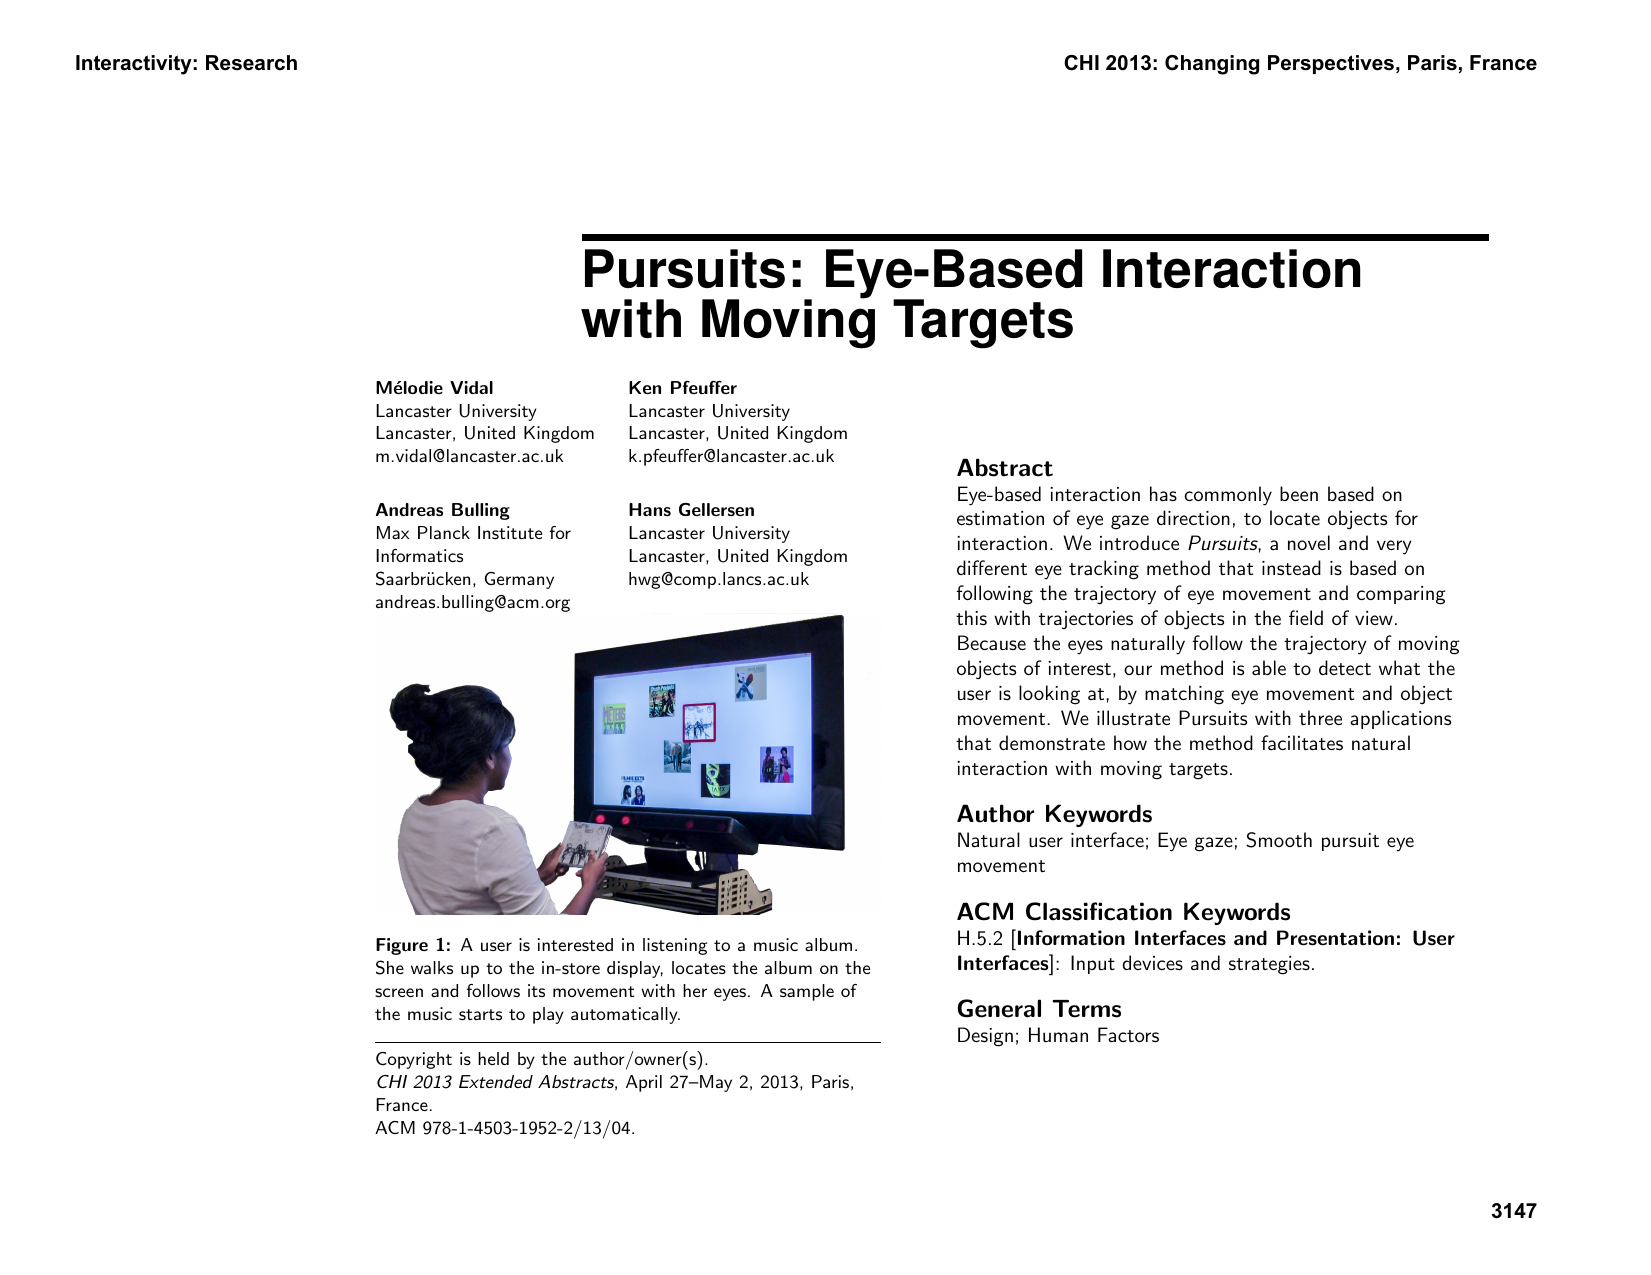 Pursuits: eye-based interaction with moving targets